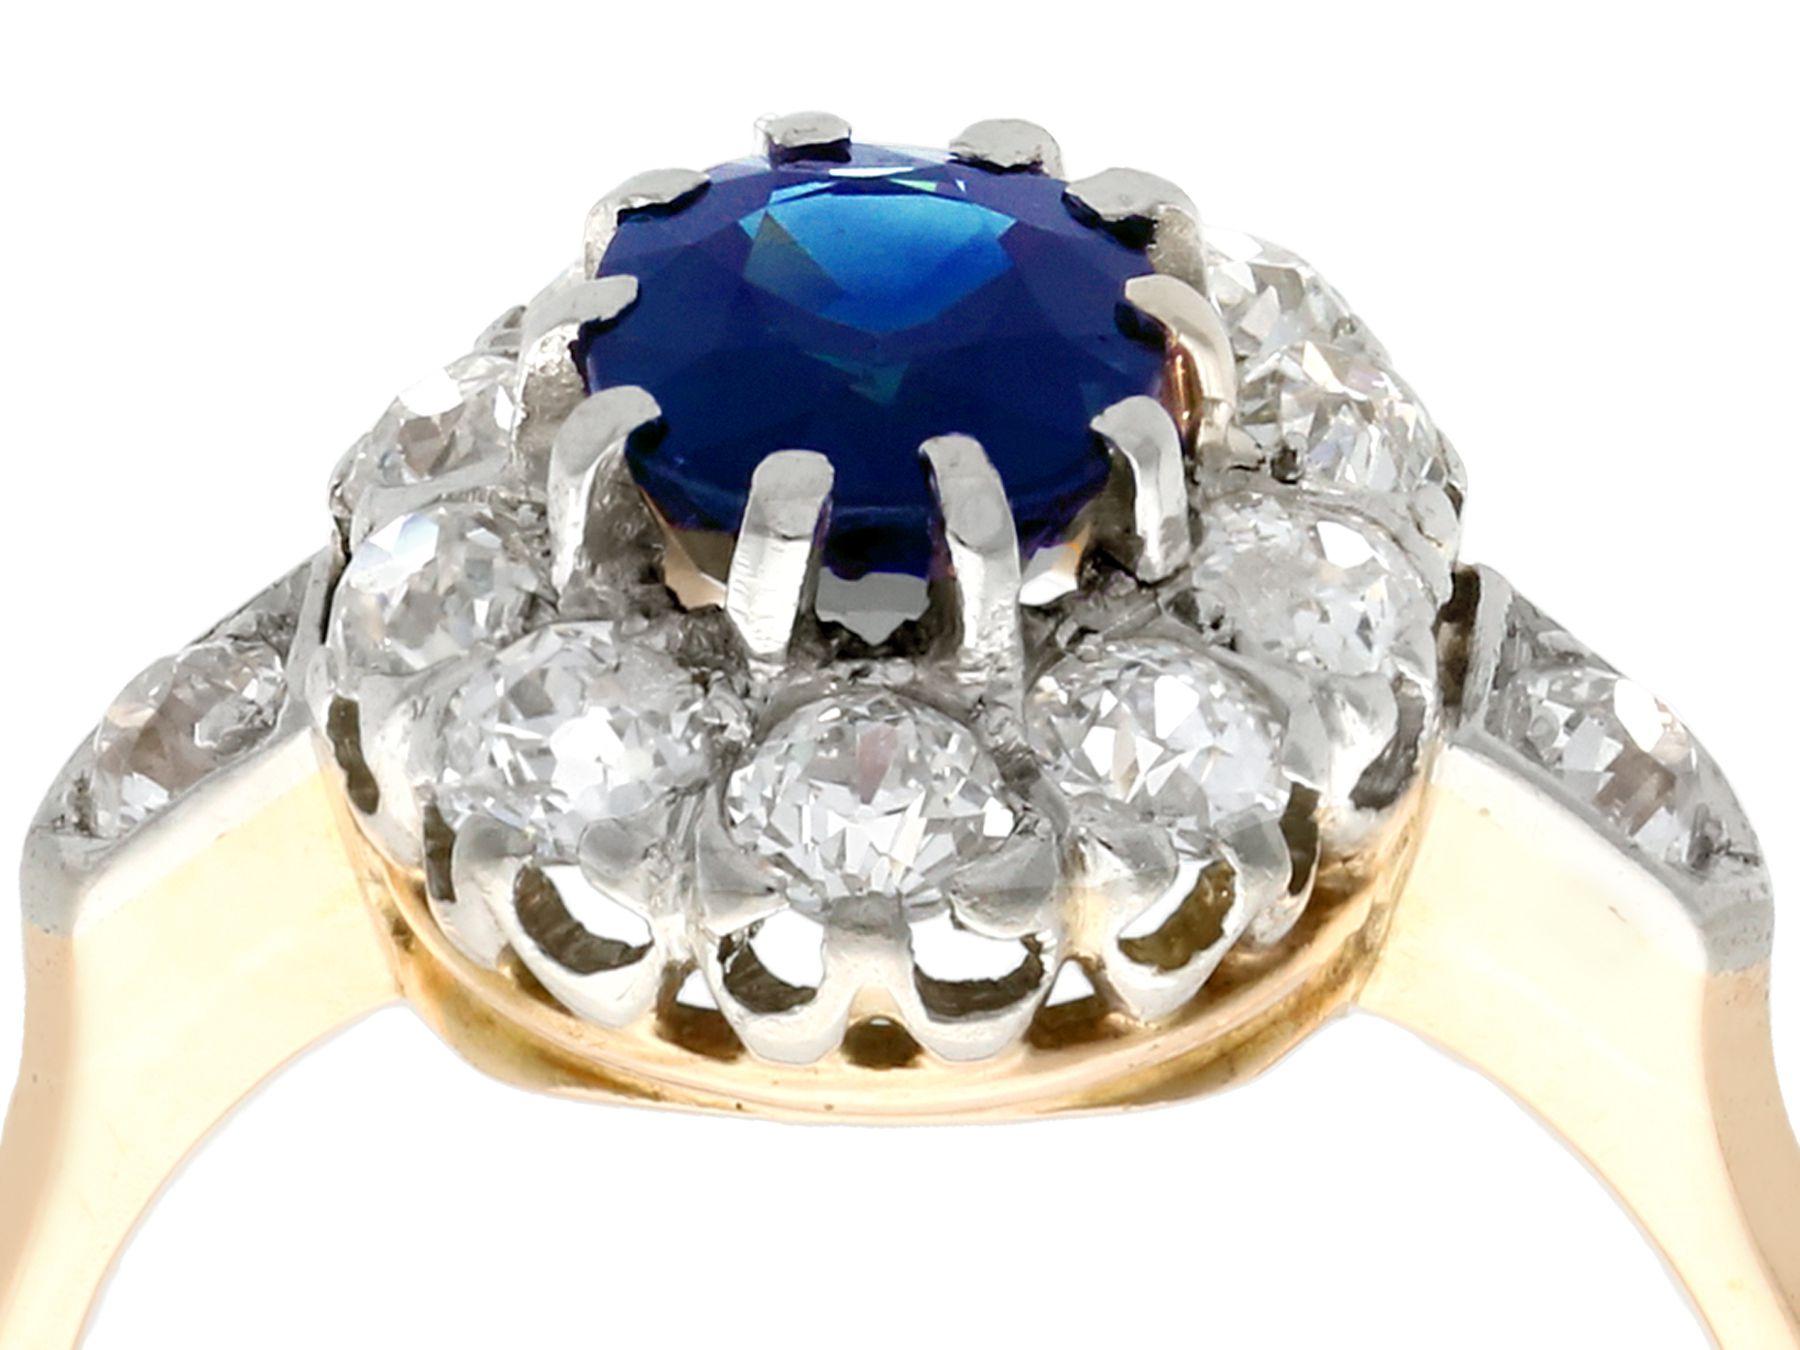 A stunning antique 1.18 carat sapphire and 0.95 carat diamond, 18 karat yellow gold and 18 karat white gold set cluster ring; part of our diverse antique jewelry collections.

This stunning, fine and impressive antique sapphire cluster ring has been